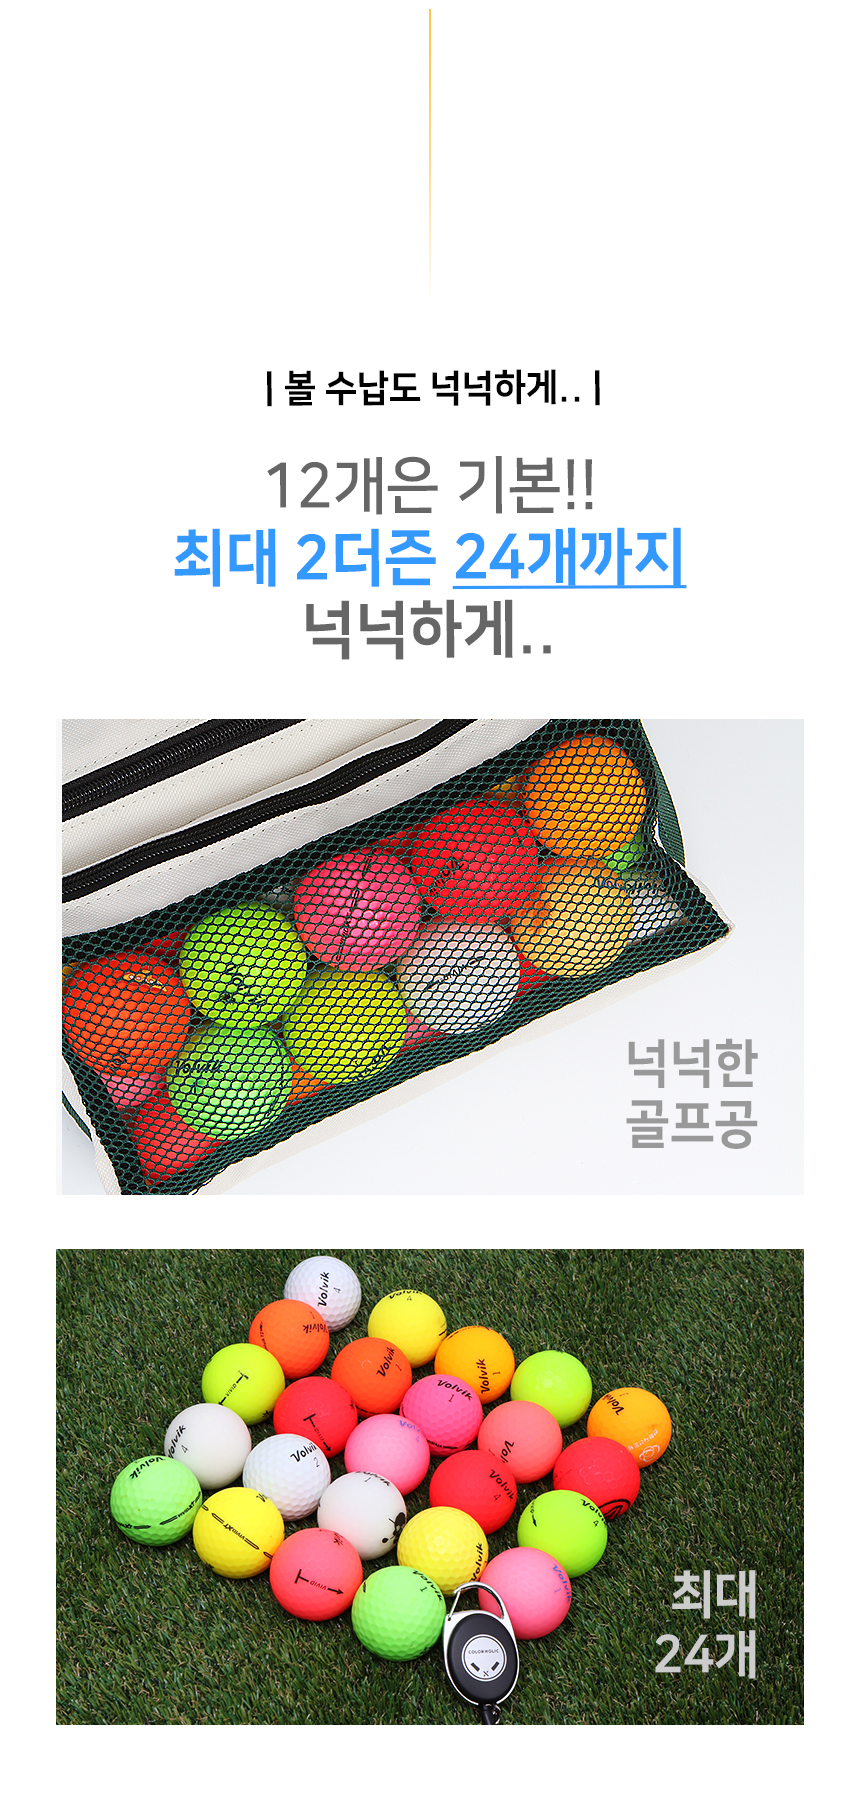 colorholic_golfcart_organizer_pouch_rok_04_page_title_story_box4.jpg